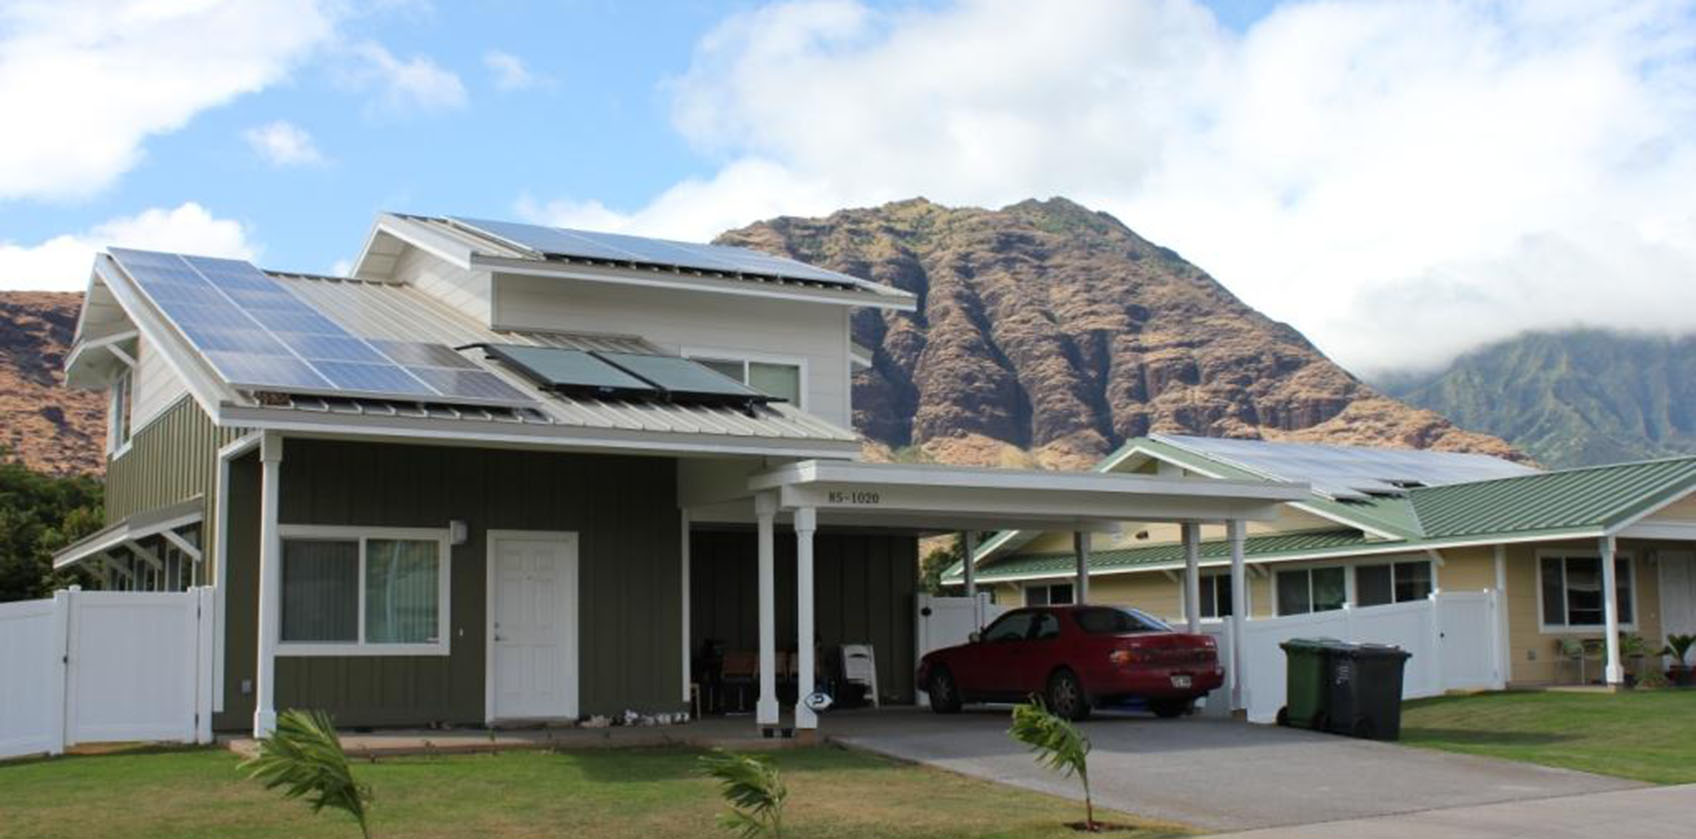 Photo of a home with rooftop photovoltaics in Hawaii